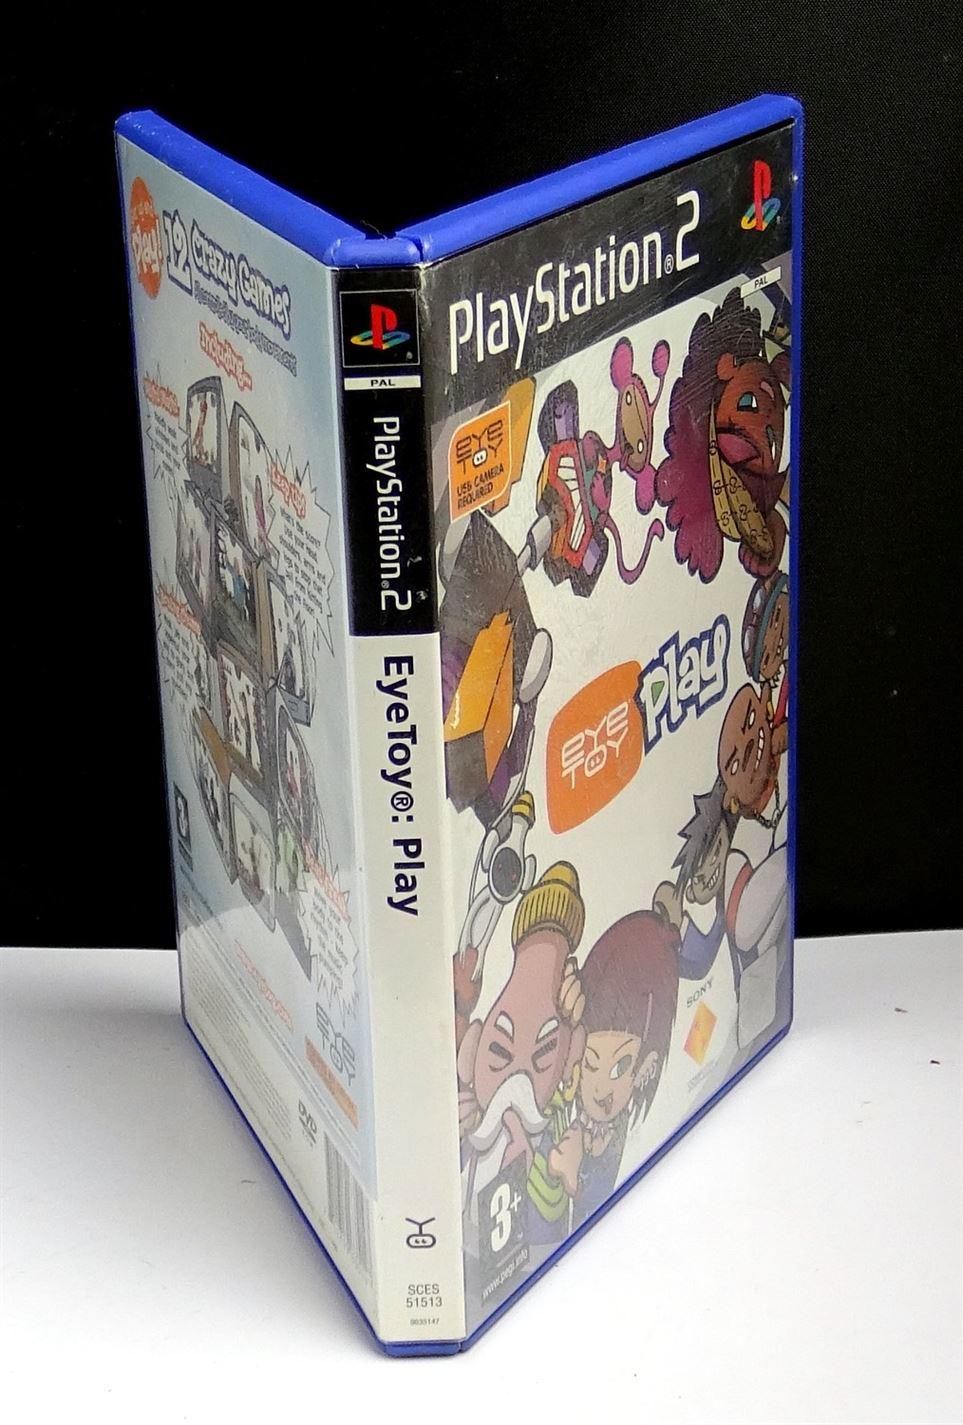 Eye Toy Play PS2 (Game Only) (Playstation 2) - UK Seller 0711719475828